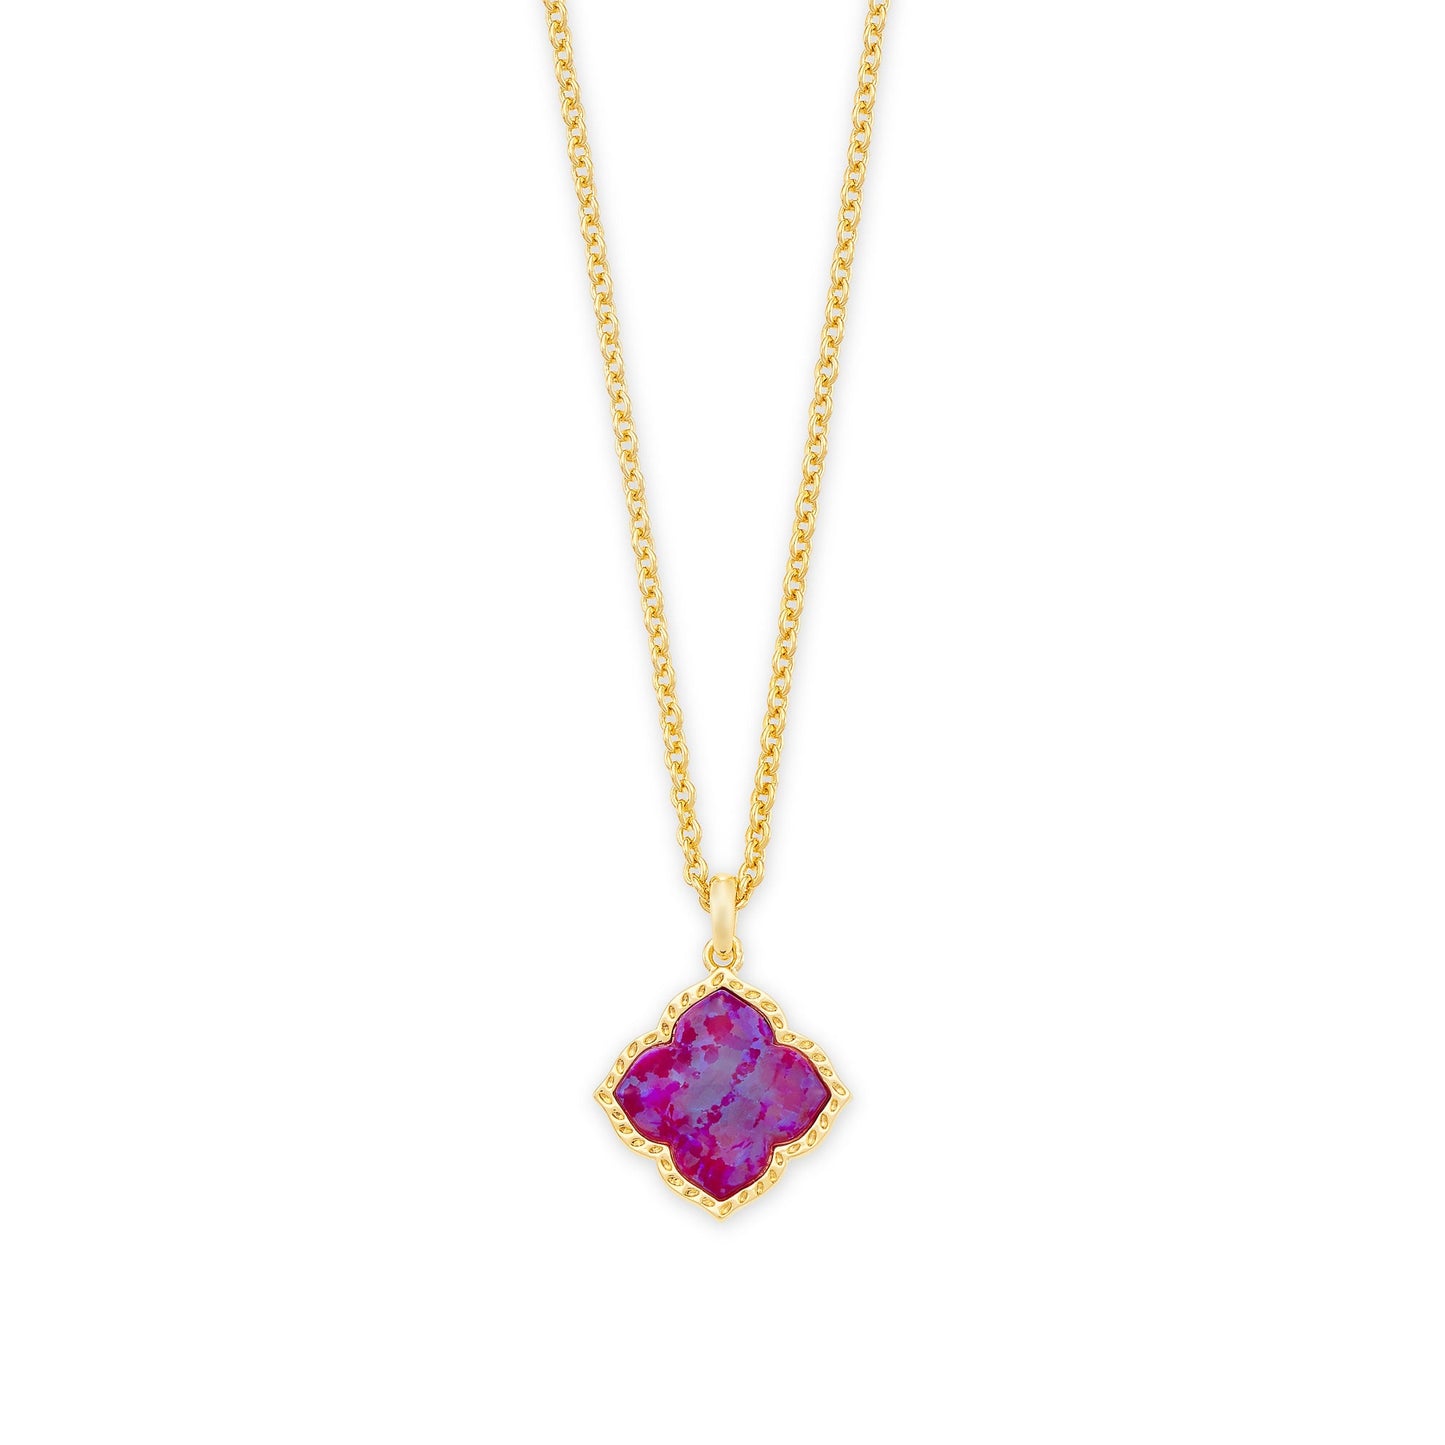 Fall 1 Mallory Pendant Necklace In Gold Plum Opal